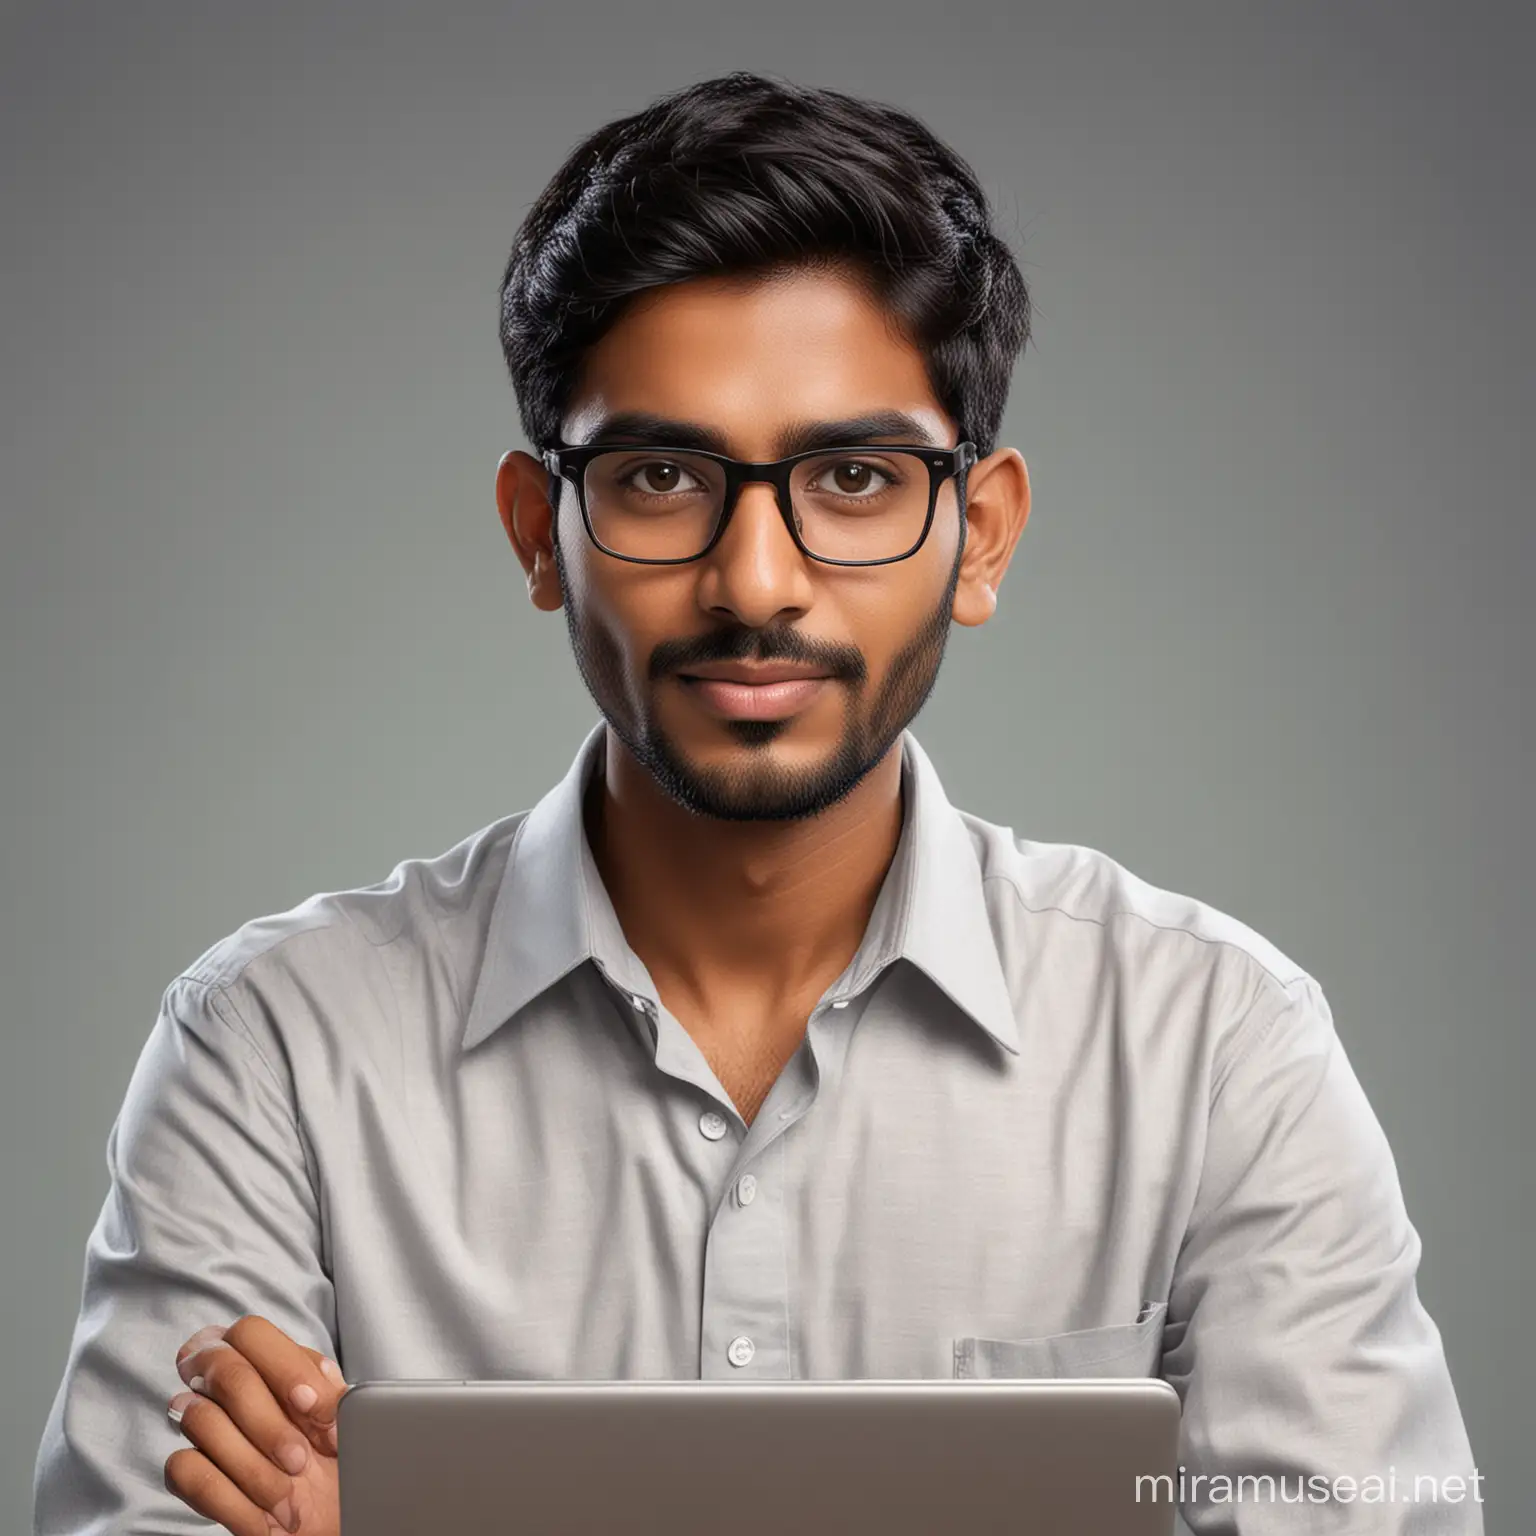 TechSavvy Indian Youth Realistic Profile Portrait